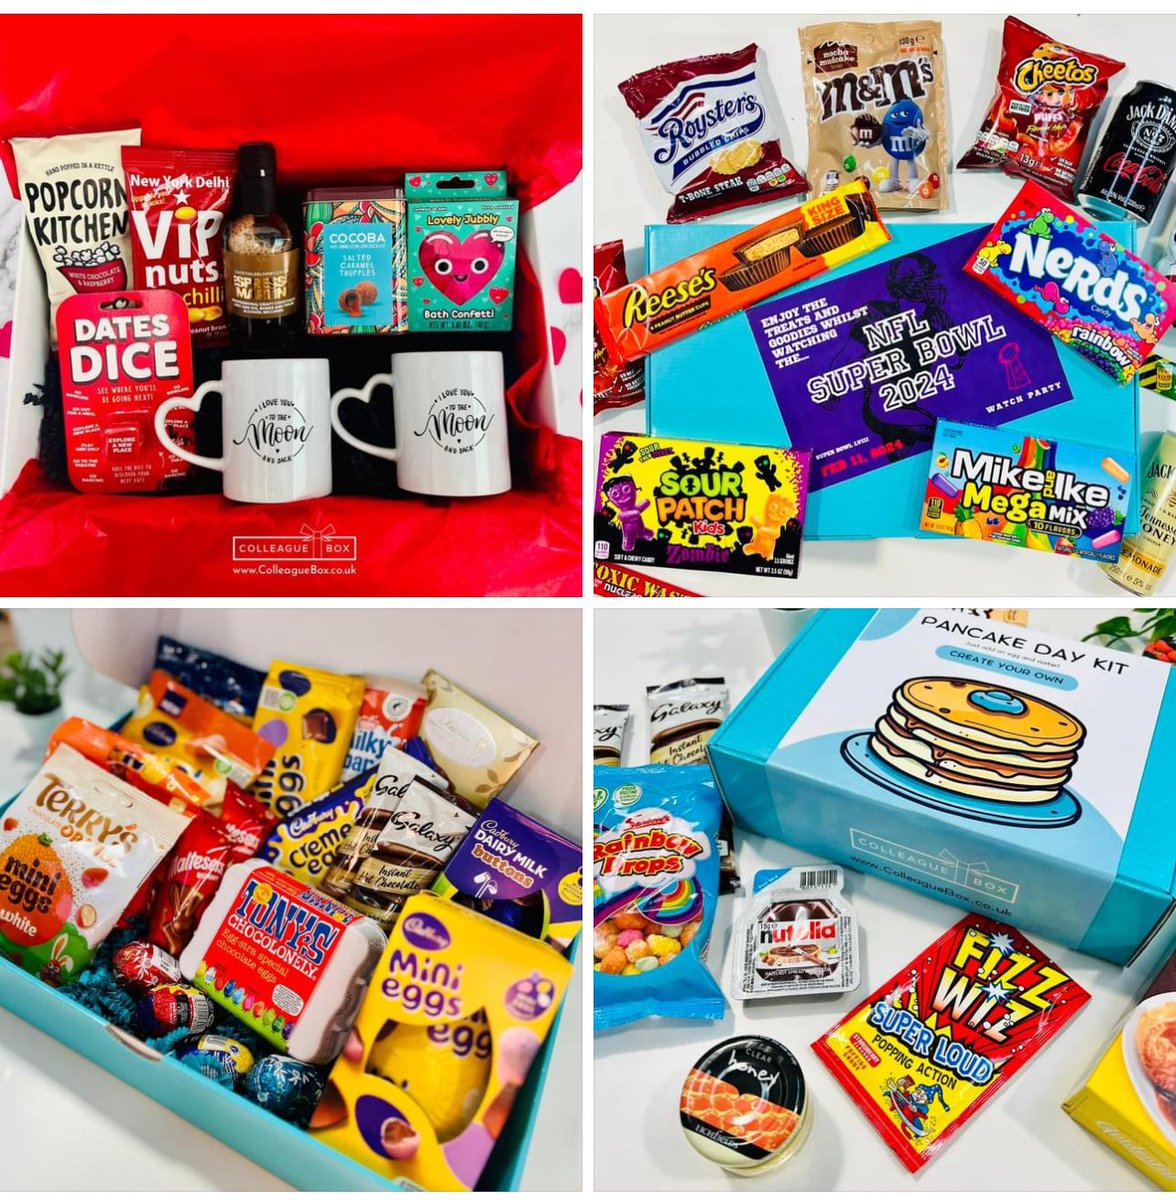 Limited Edition Seasonal Gifts: ❤️ Valentines Day Sharing Hamper 🏈 Super Bowl Snack Pack 🥞 Pancake Day Create Your Own Kit 🐣 Easter Chocolate Sharing Hamper All gifts include personalised printed message and sleeve! Order online at colleaguebox.co.uk